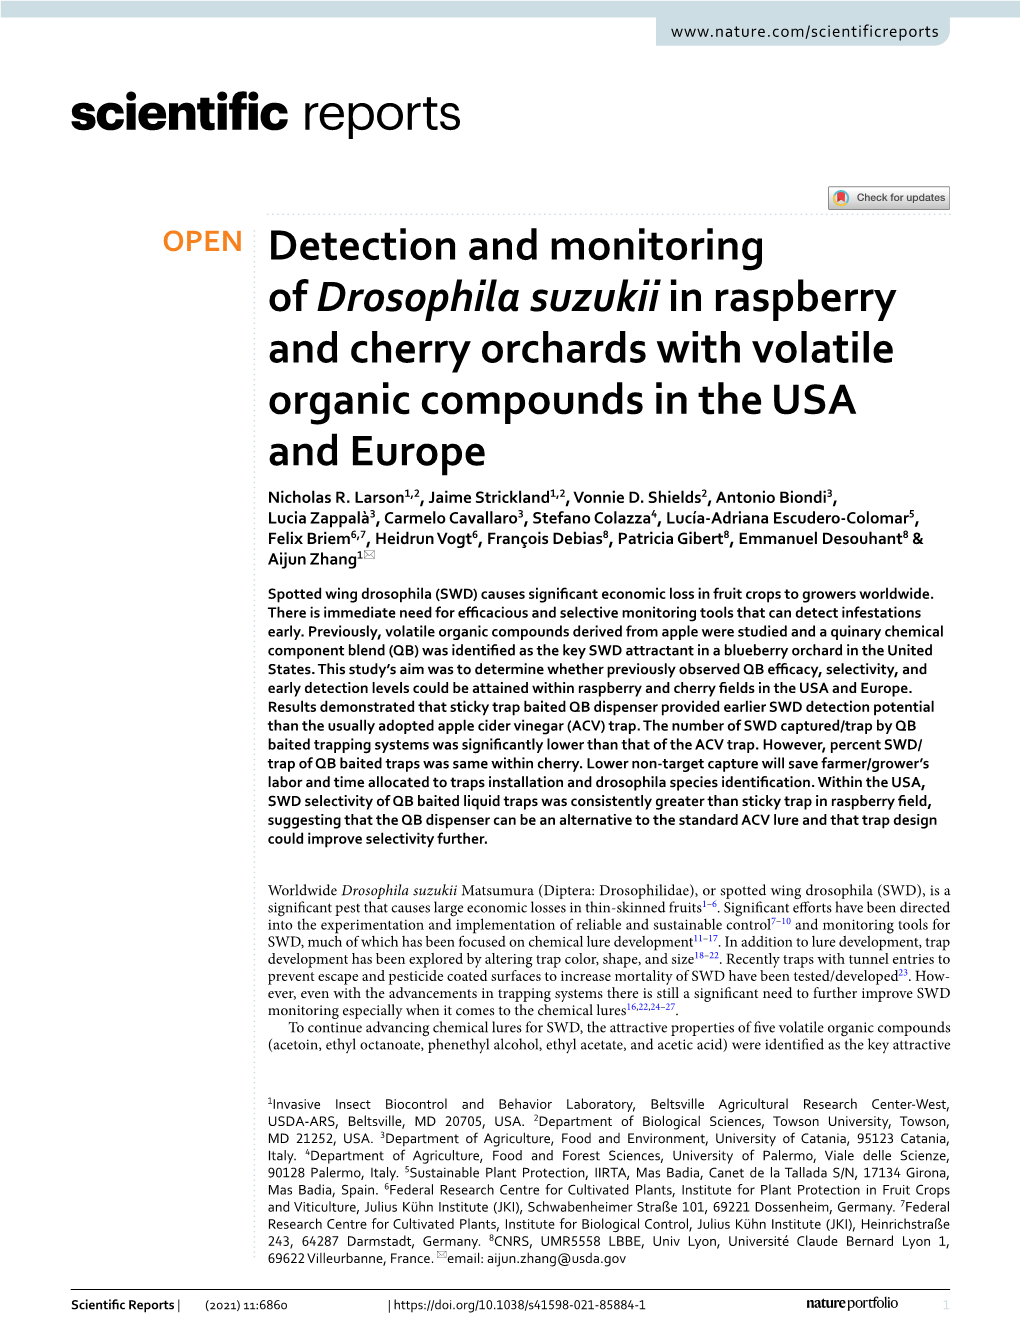 Detection and Monitoring of Drosophila Suzukii in Raspberry and Cherry Orchards with Volatile Organic Compounds in the USA and Europe Nicholas R